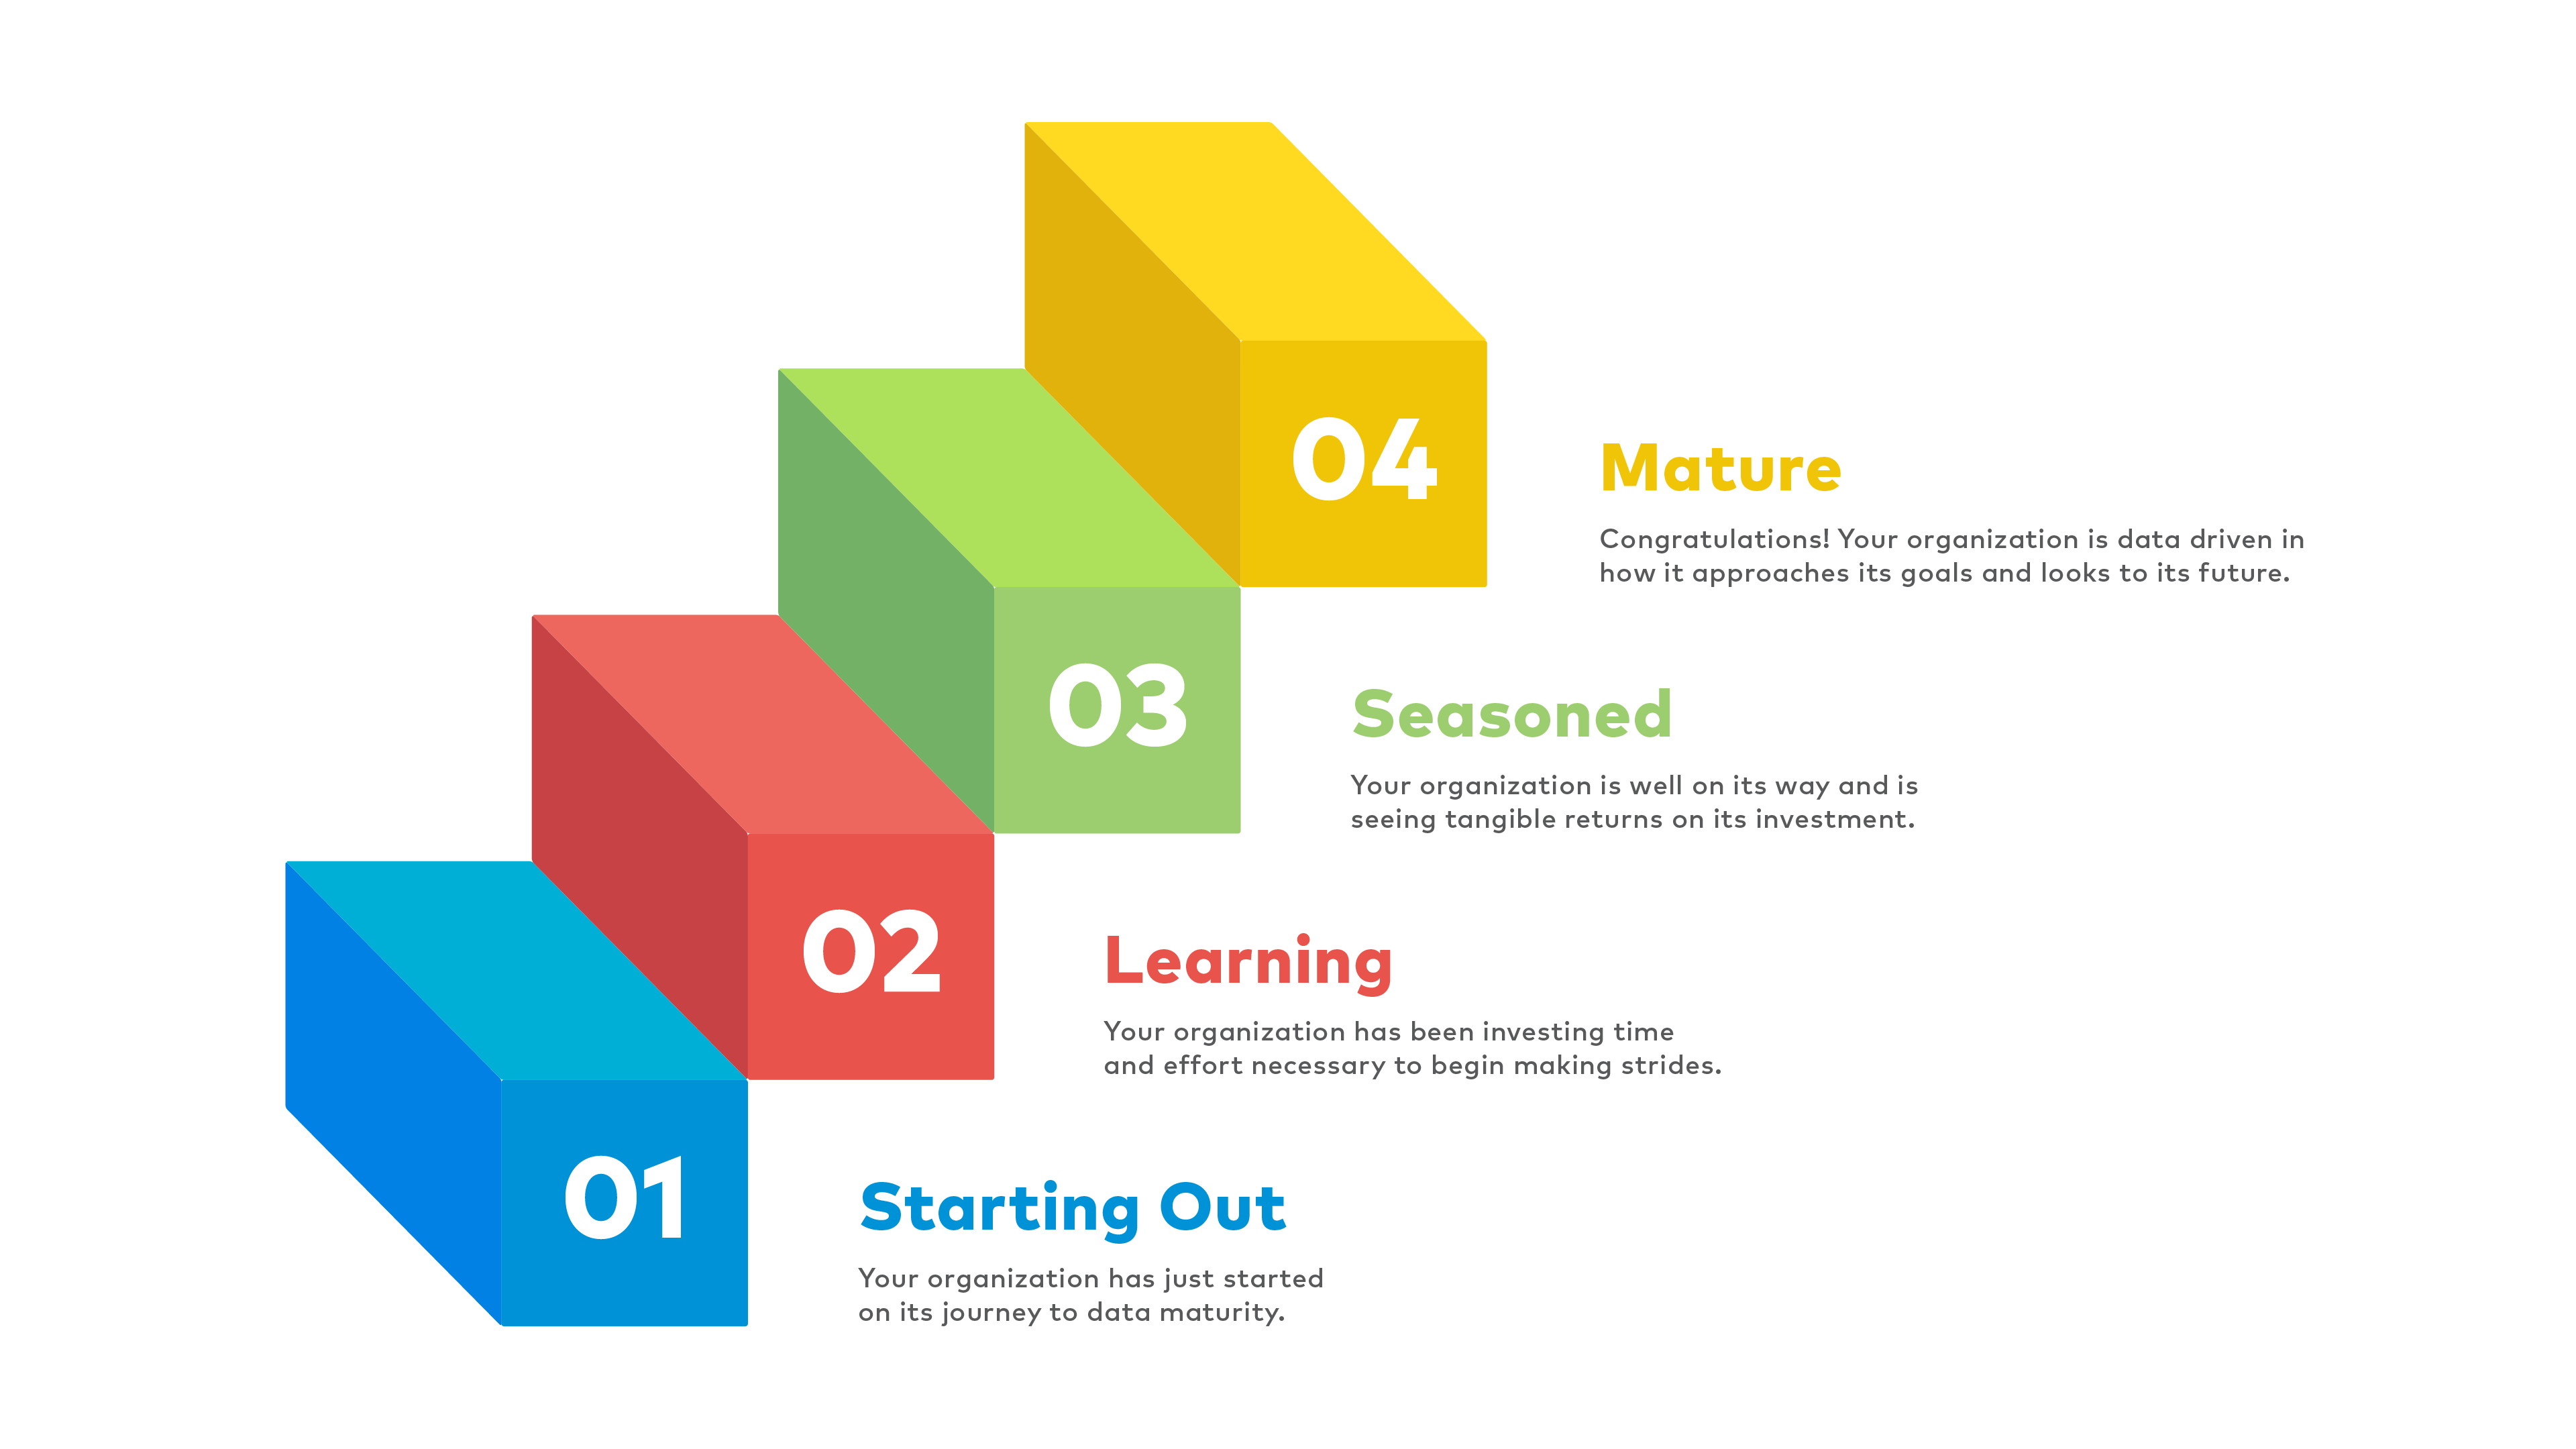 Data Maturity infographic showing Starting Out, Learning, Seasoned and Mature stages